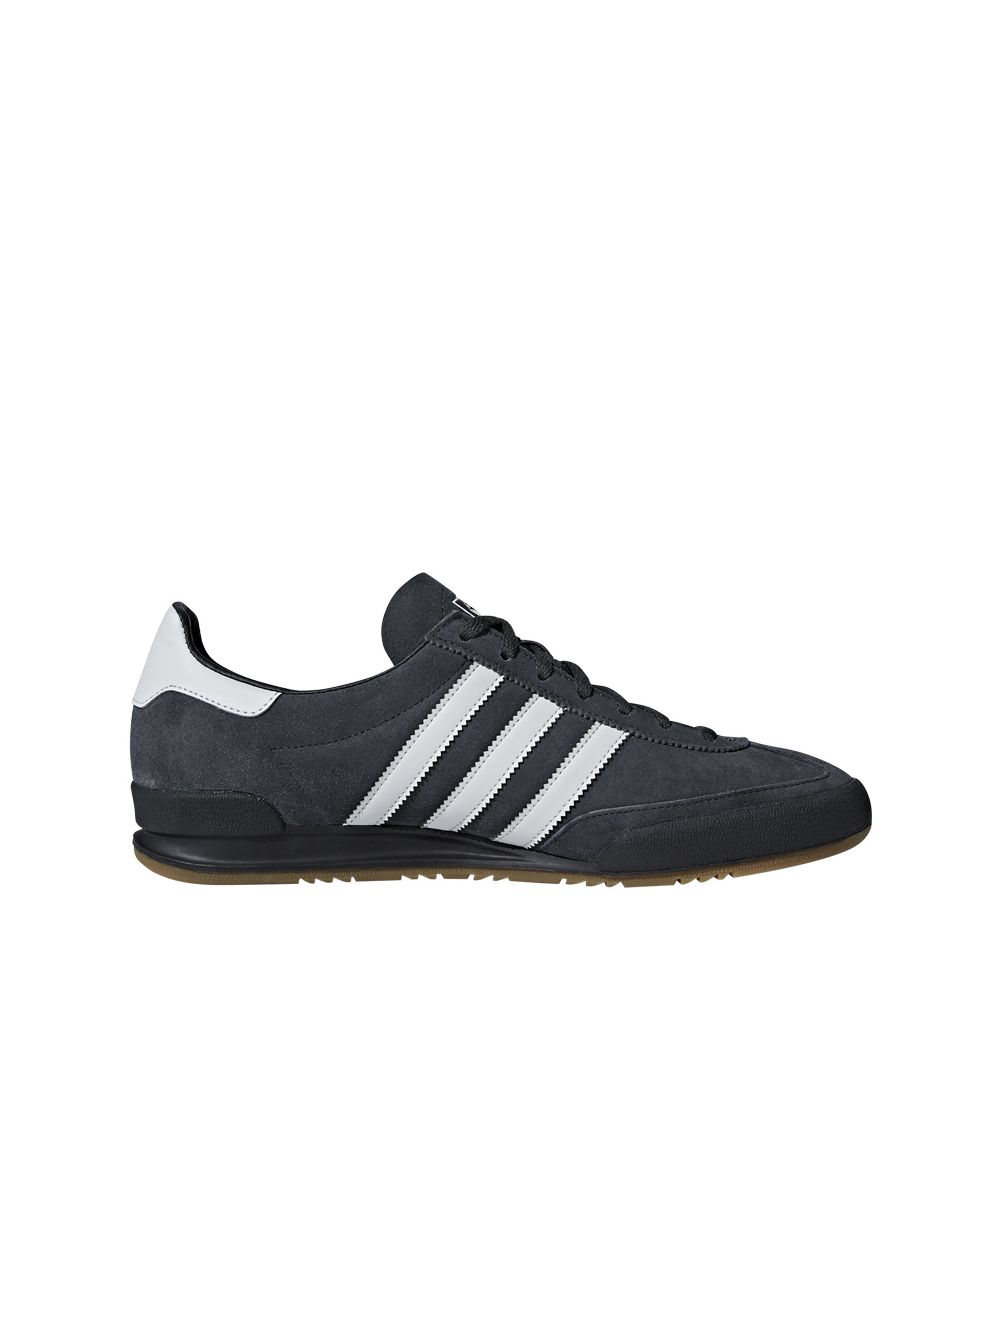 adidas jeans carbon grey size 1